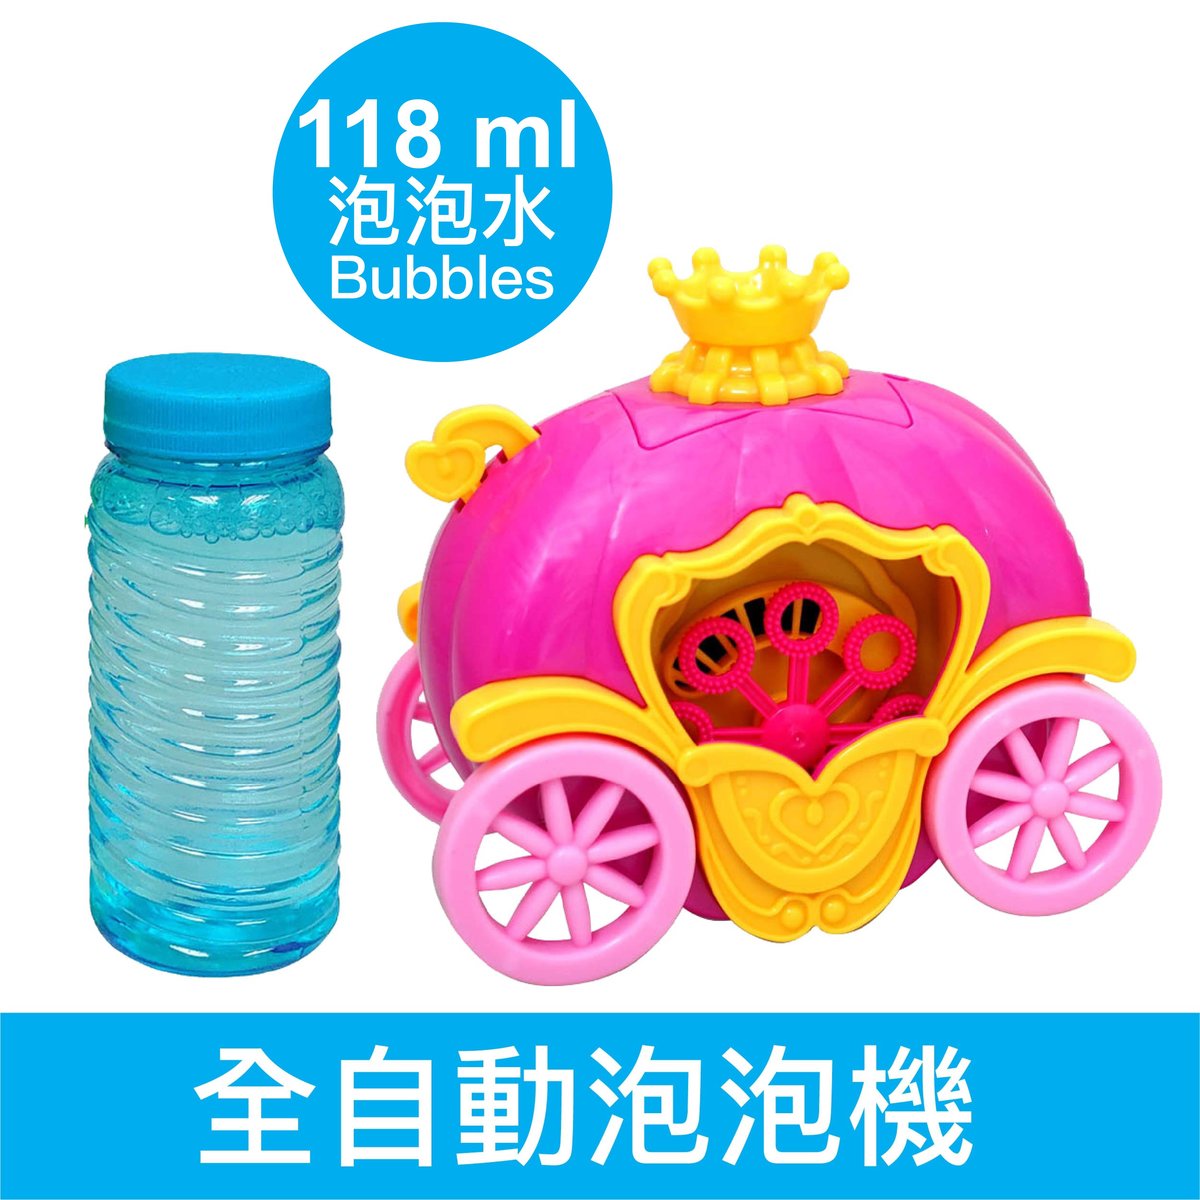 Princess Carriage Bubble Machine - Automatic - 1 Bubble Solution (118ml) included - Battery Operated